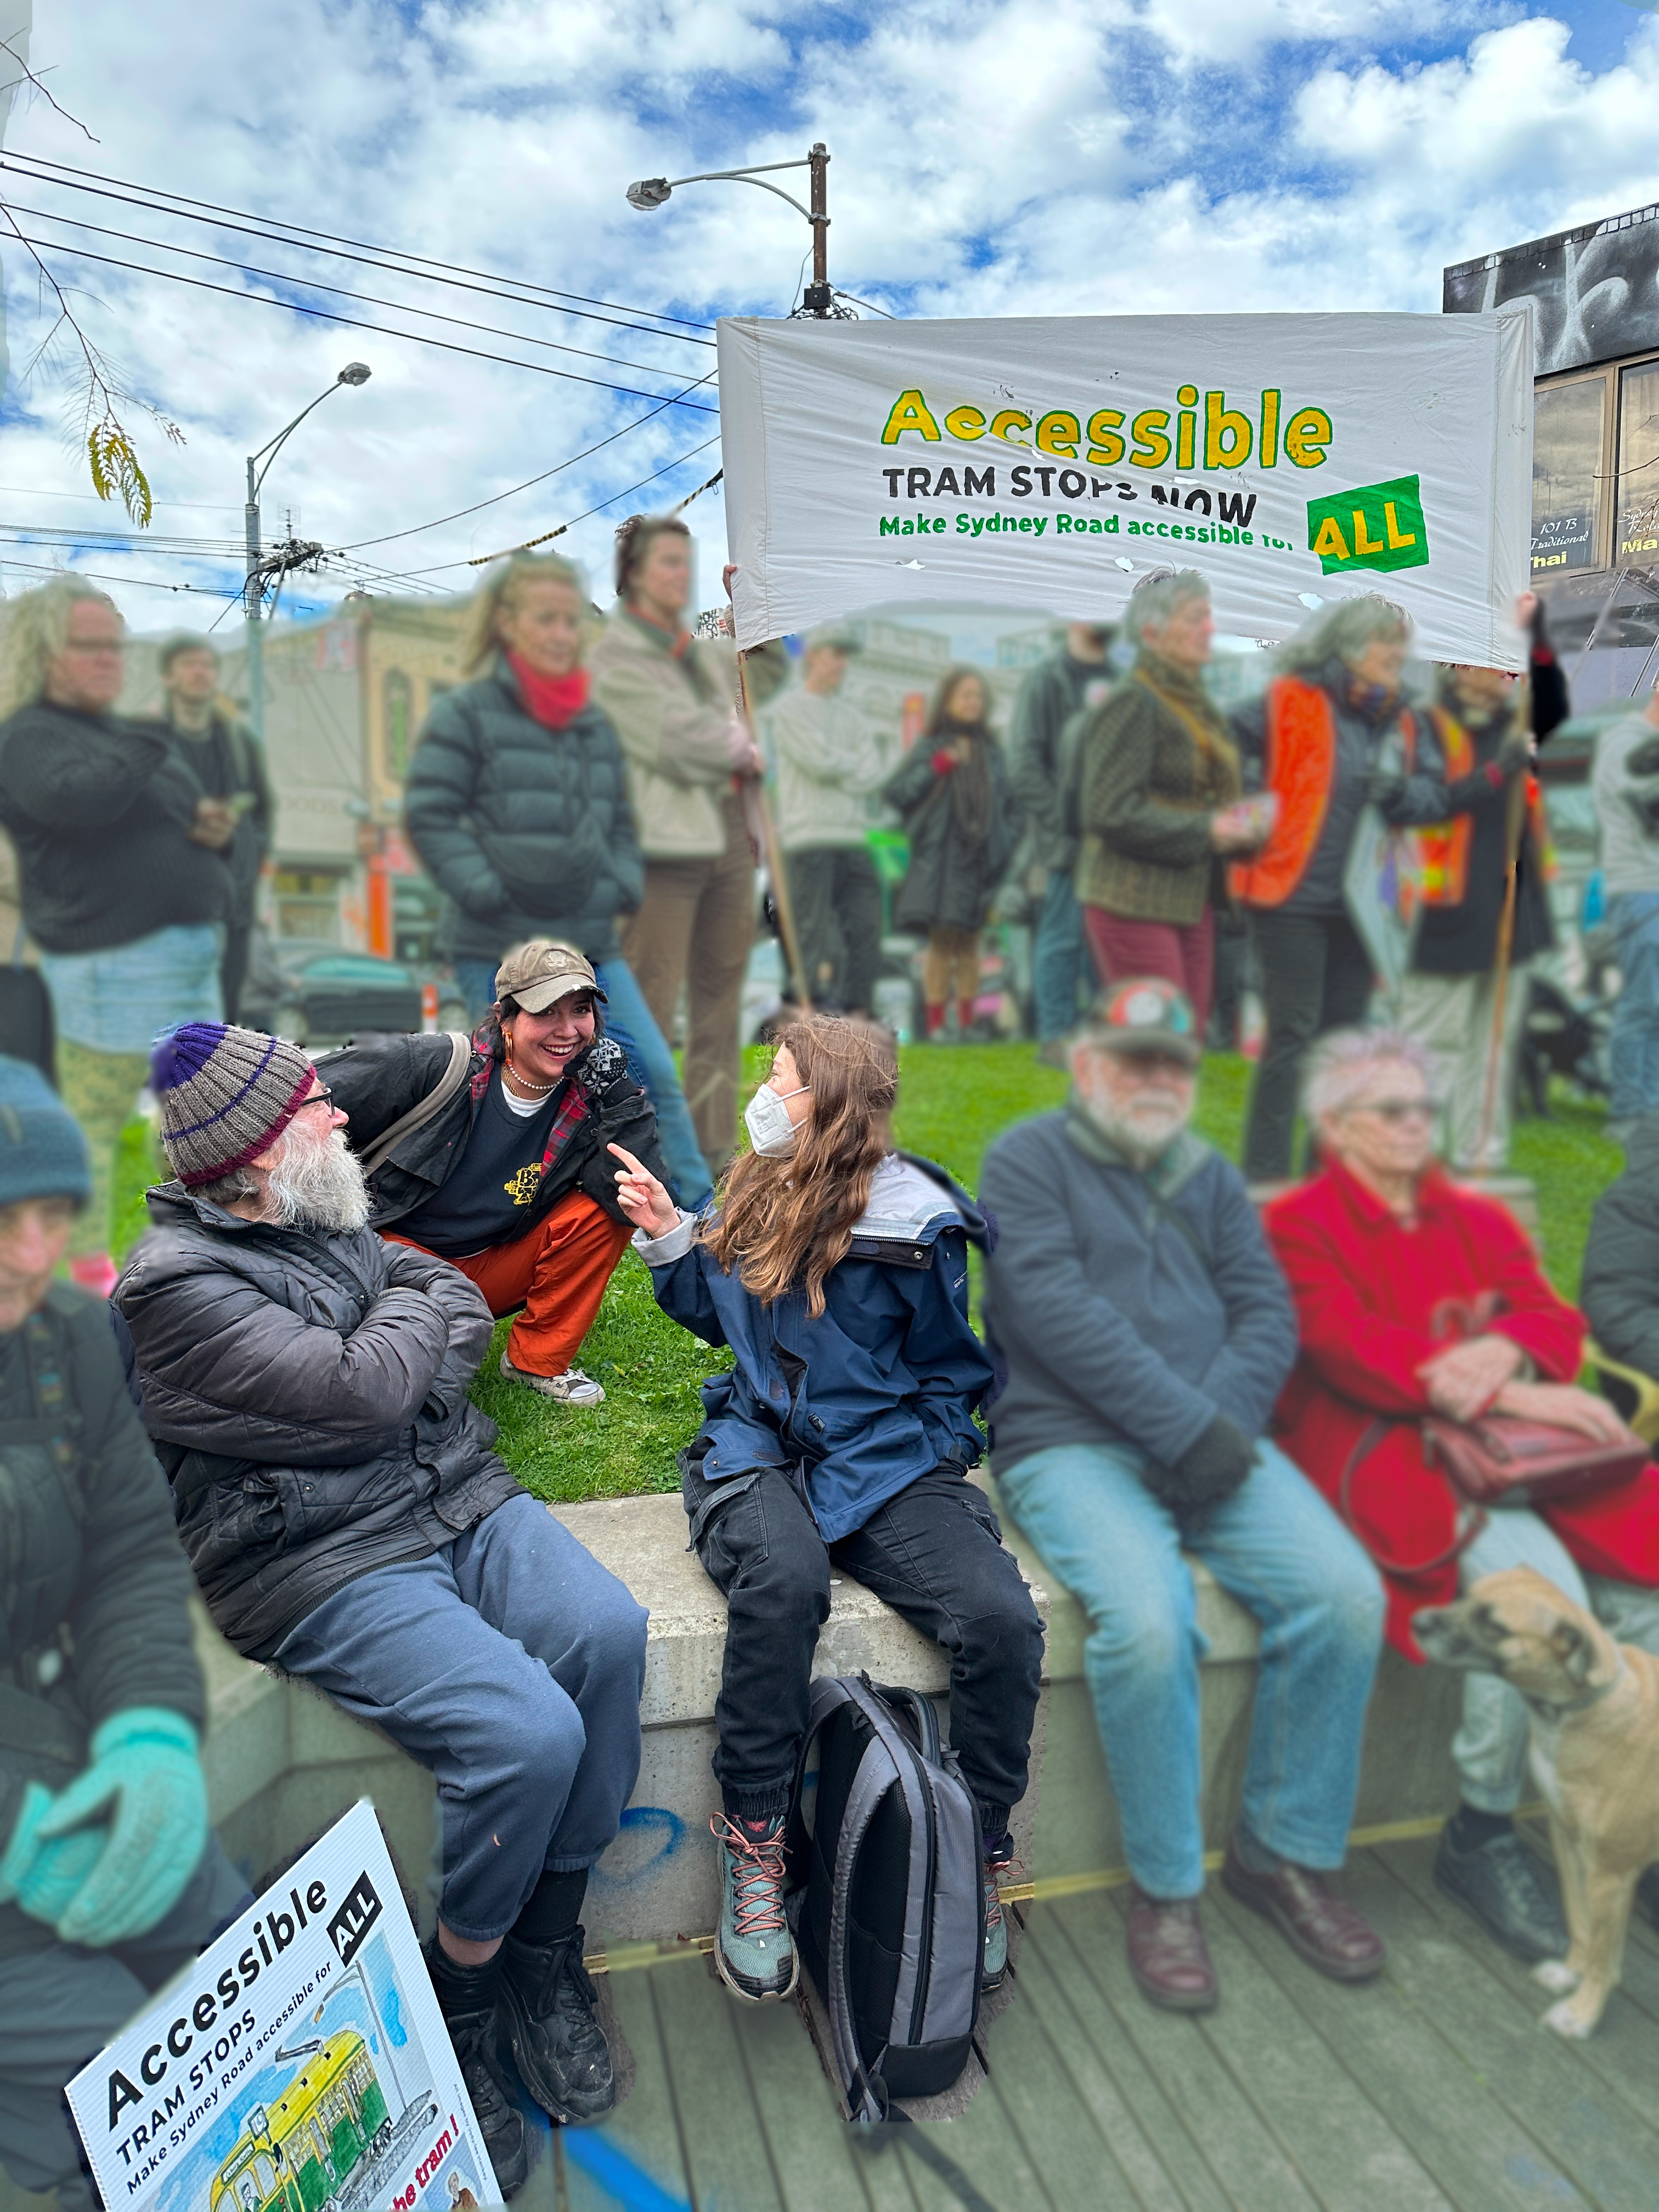 A photograph of several people sitting in a small plaza, with everything blurred except three people talking and laughing in the foreground - hosts Kevin, Karina and Zeb, also visible is a large hand-painted banner which reads Accessible Tram Stops NOW - Make Public Transport Accessible for all!